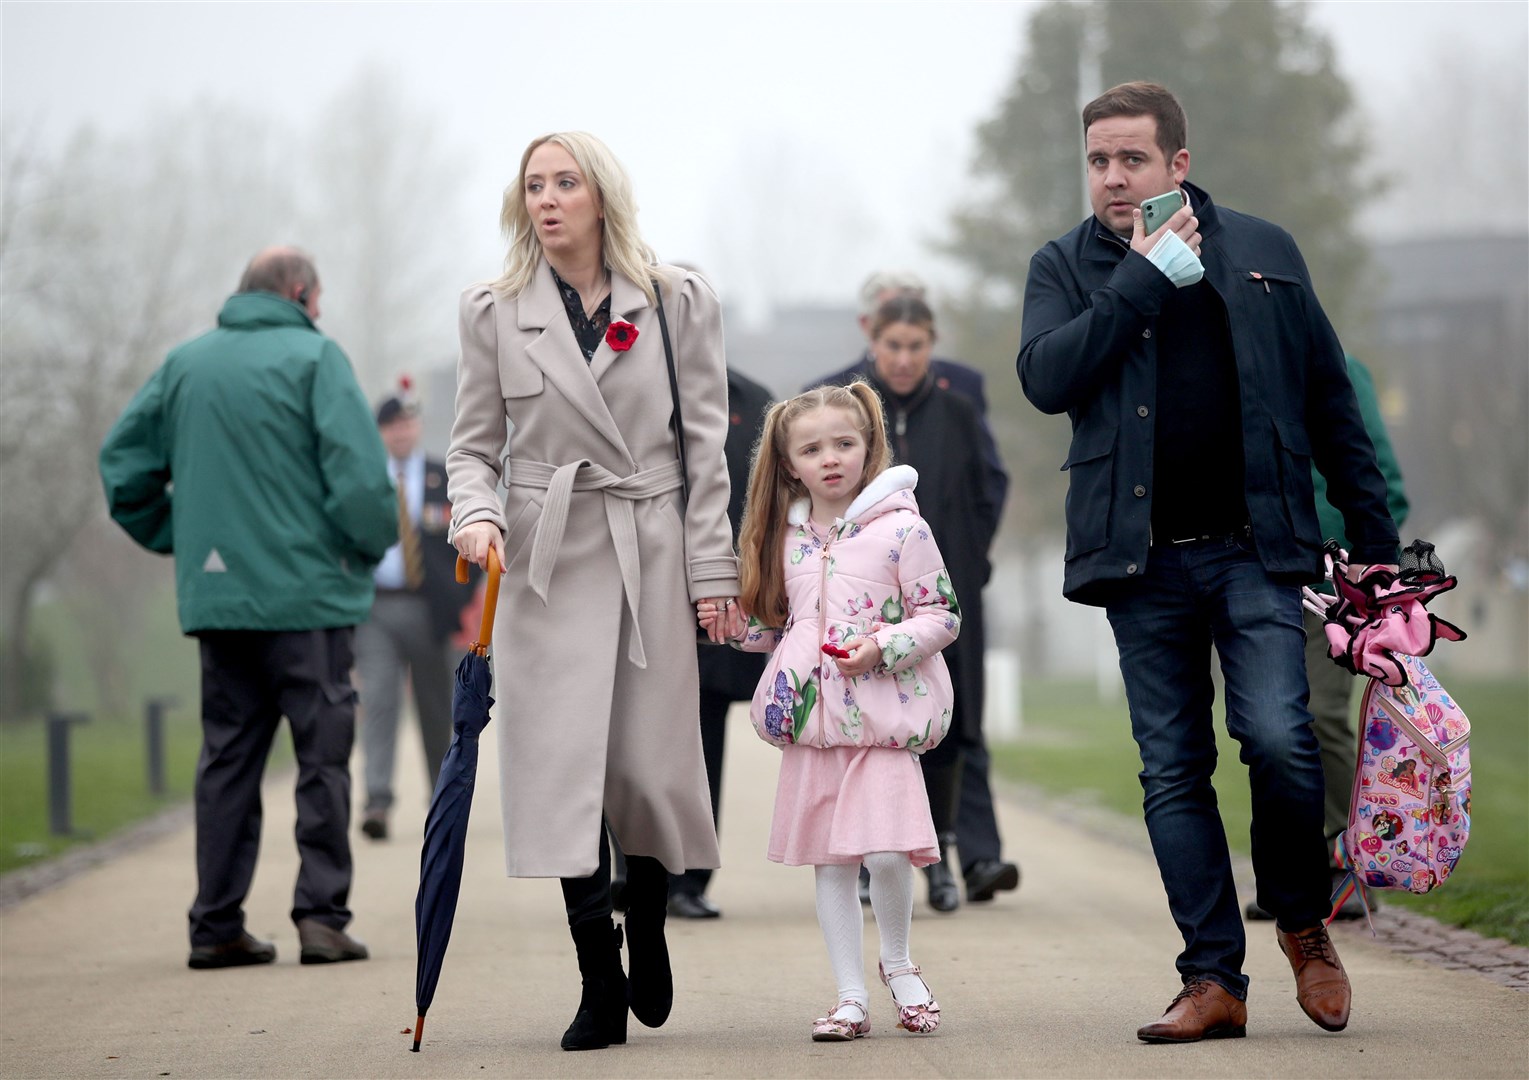 Meanwhile in Staffordshire, pre-booked visitors attended commemorations at the National Memorial Arboretum in Alrewas (Danny Lawson/PA)